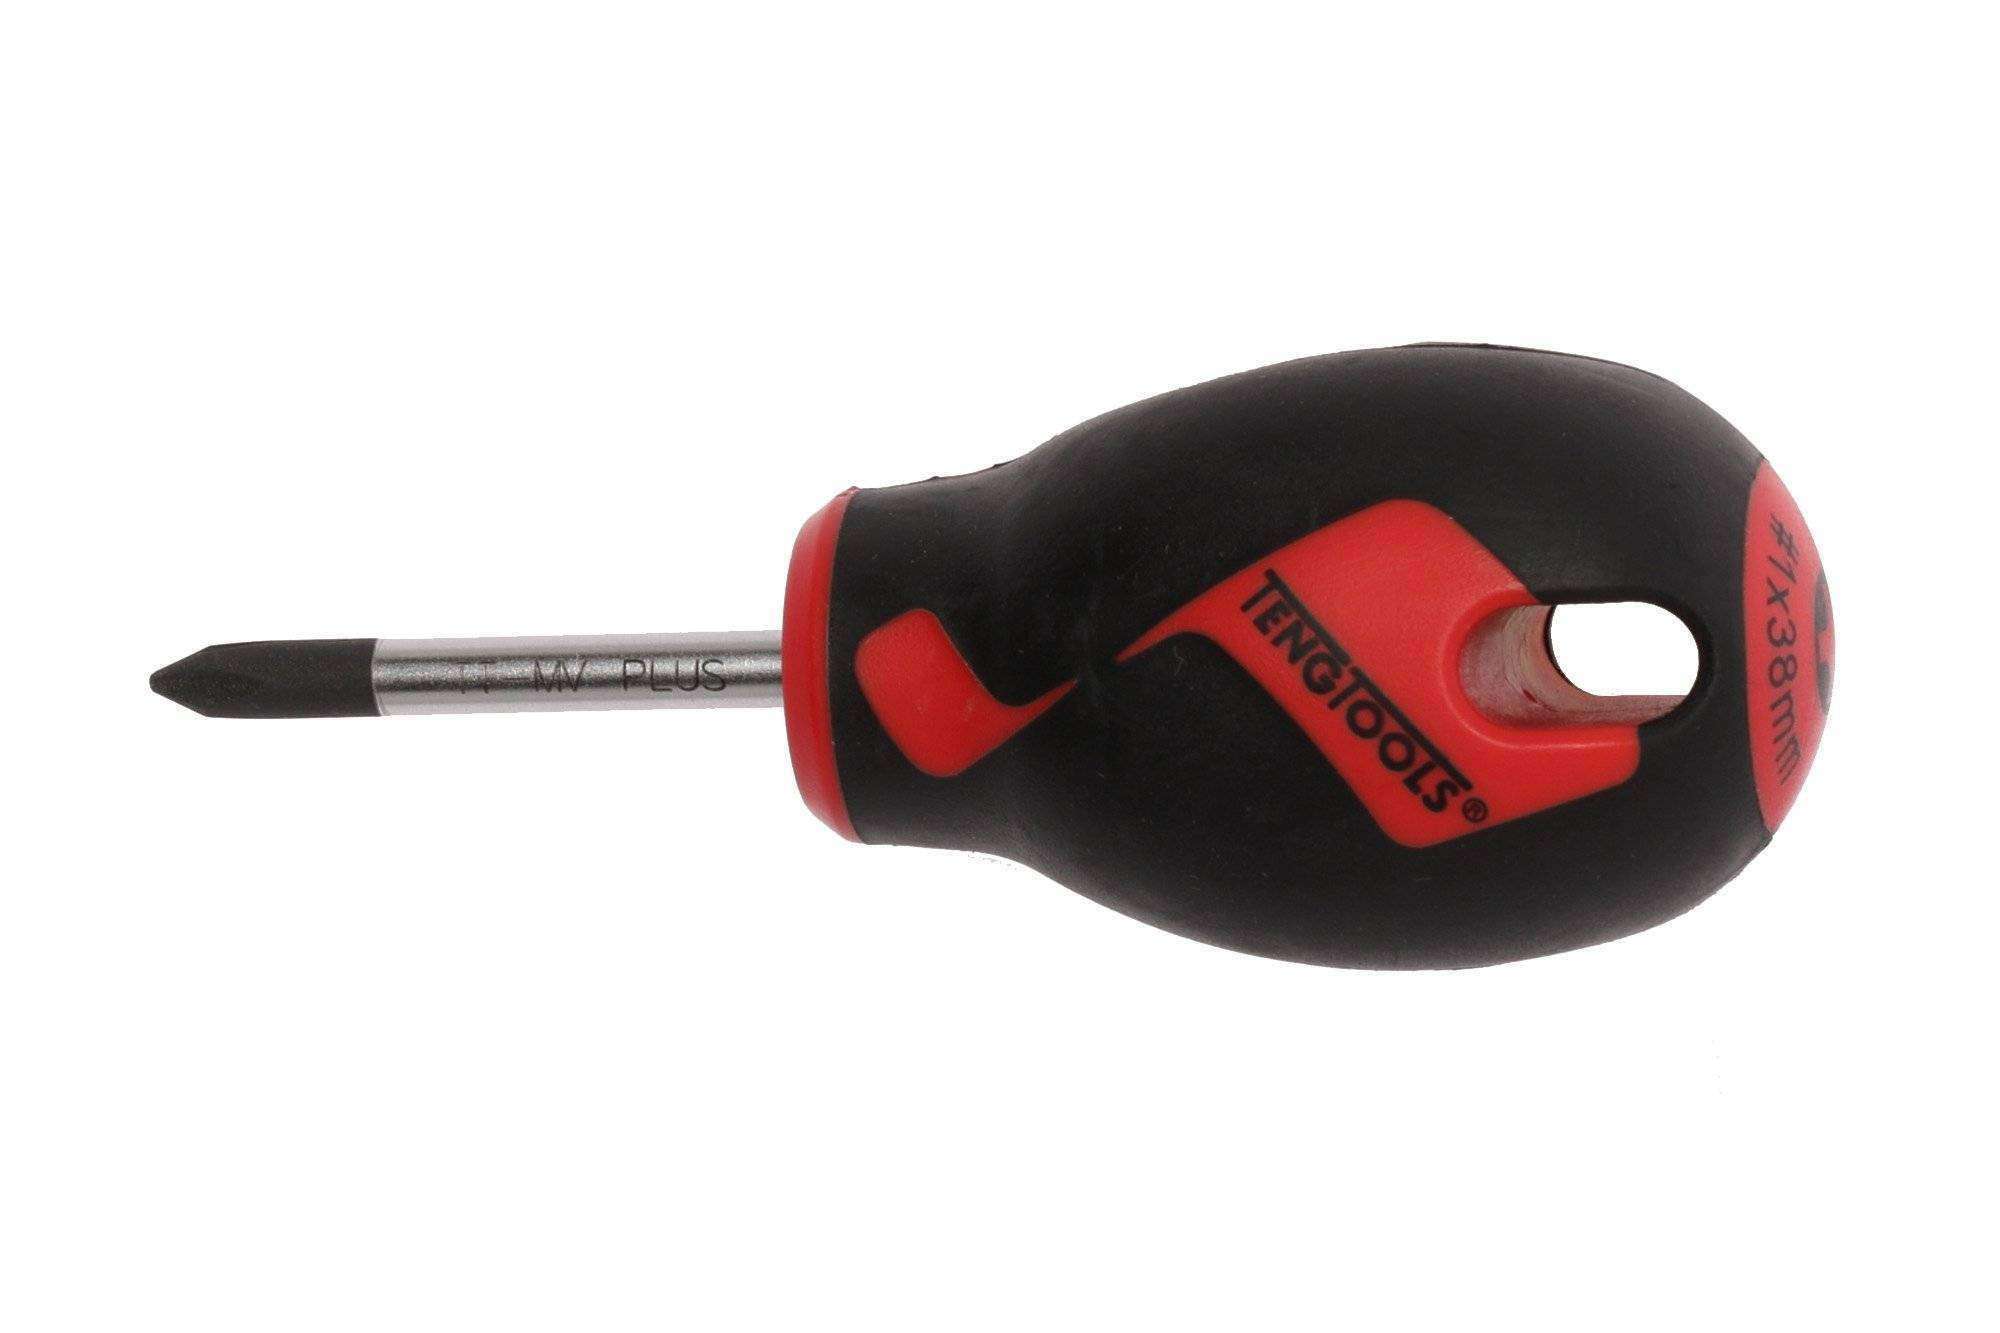 Teng Tools PH1 x 1.5 Inch/38mm Head Phillips Screwdriver with Ergonomic, Comfortable Handle - MD947N